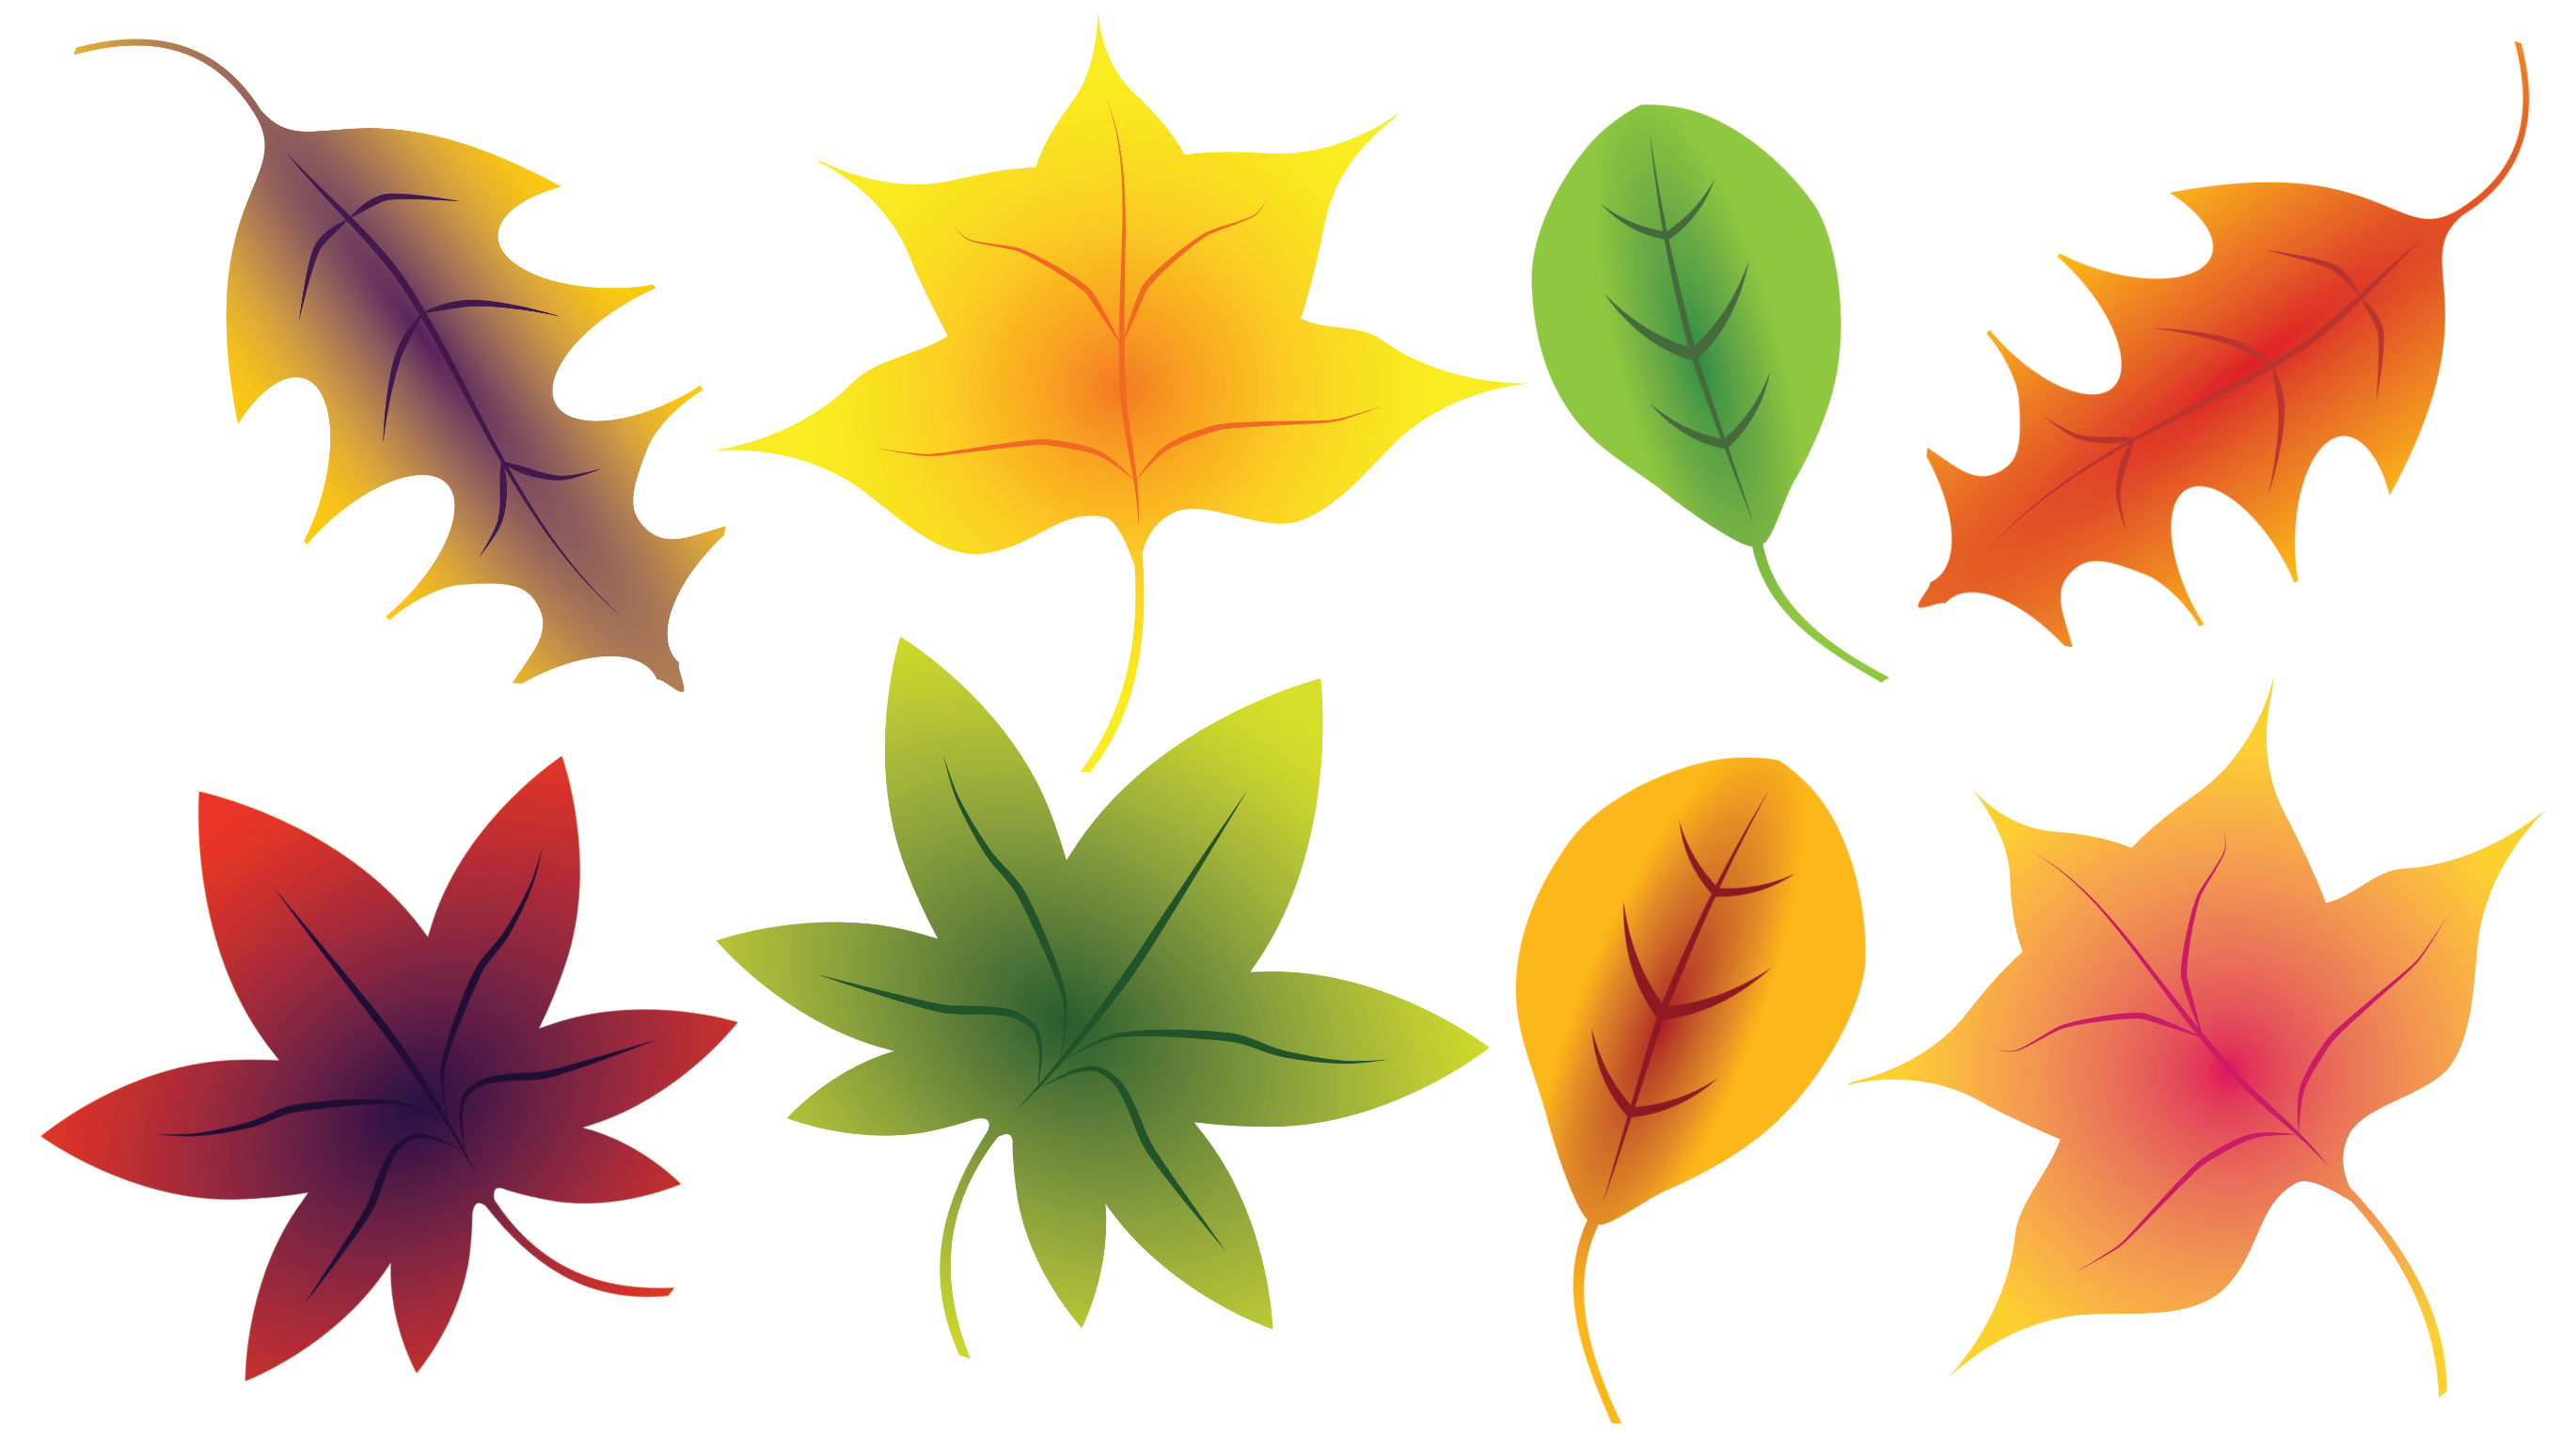 Fall Leaves Clip Art A Free Clip Art Bundle That's Too Good To Miss!